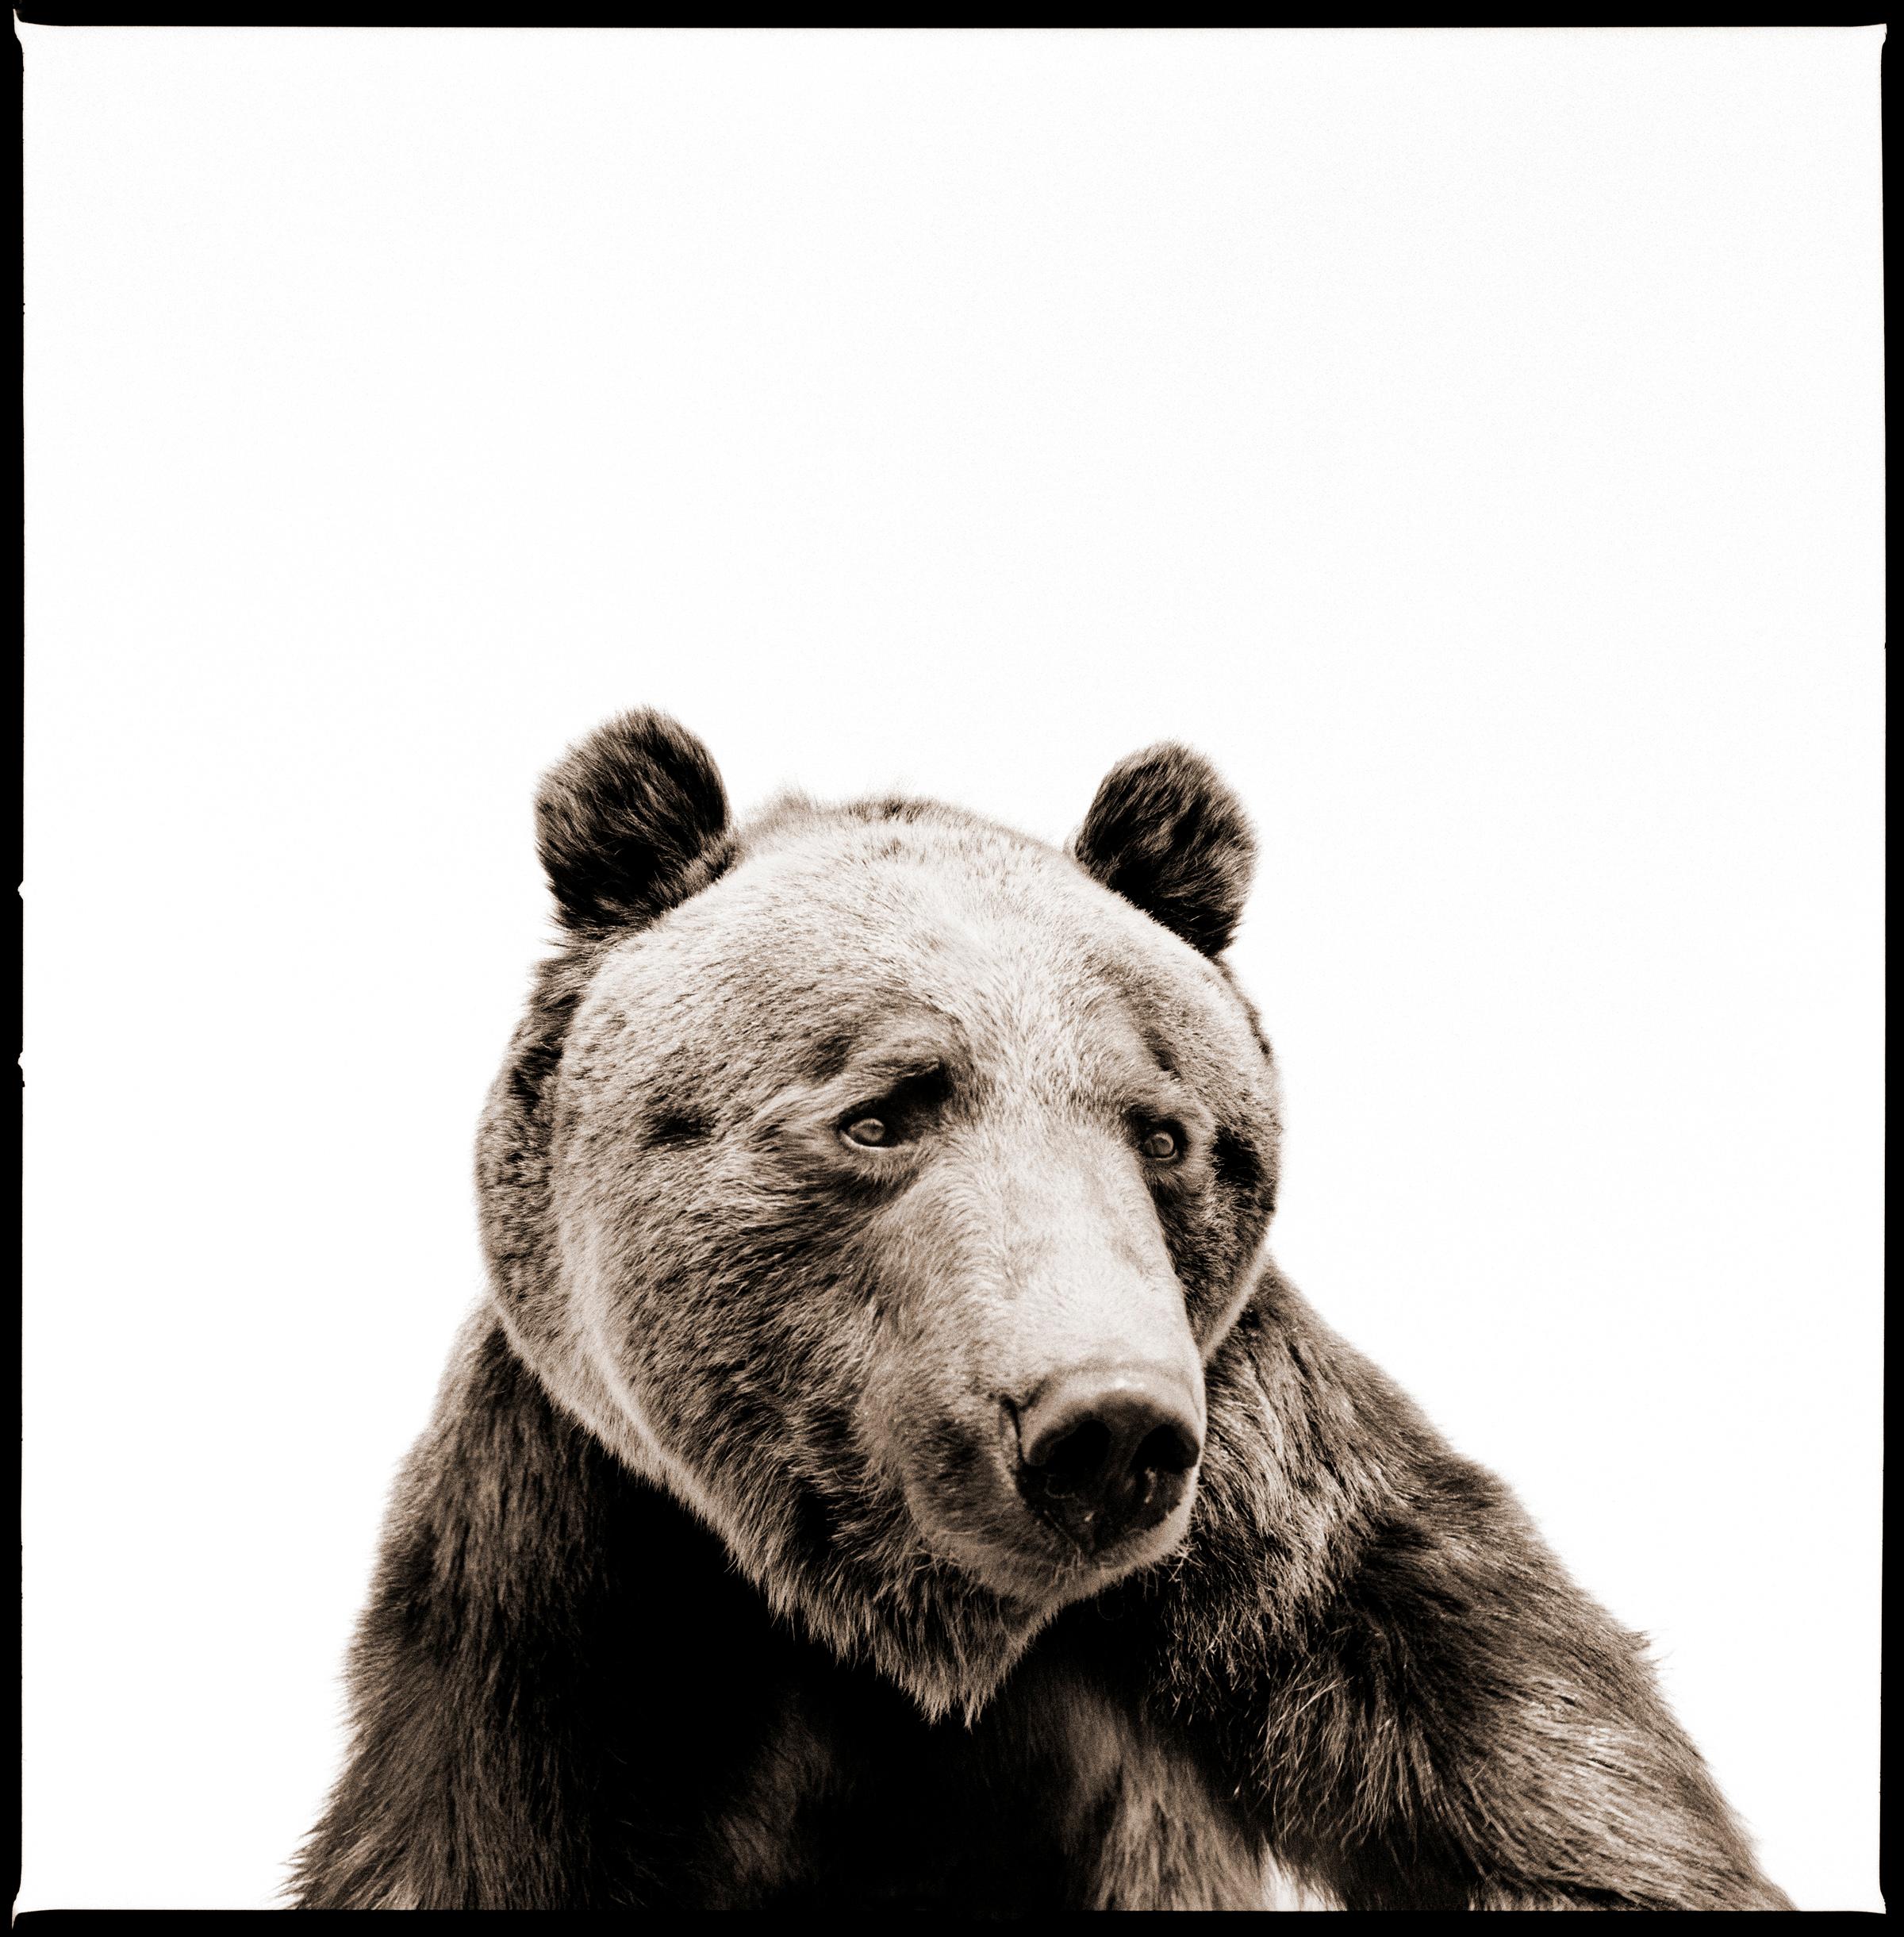 Grizzly II (13/40) - Photograph by Nine Francois